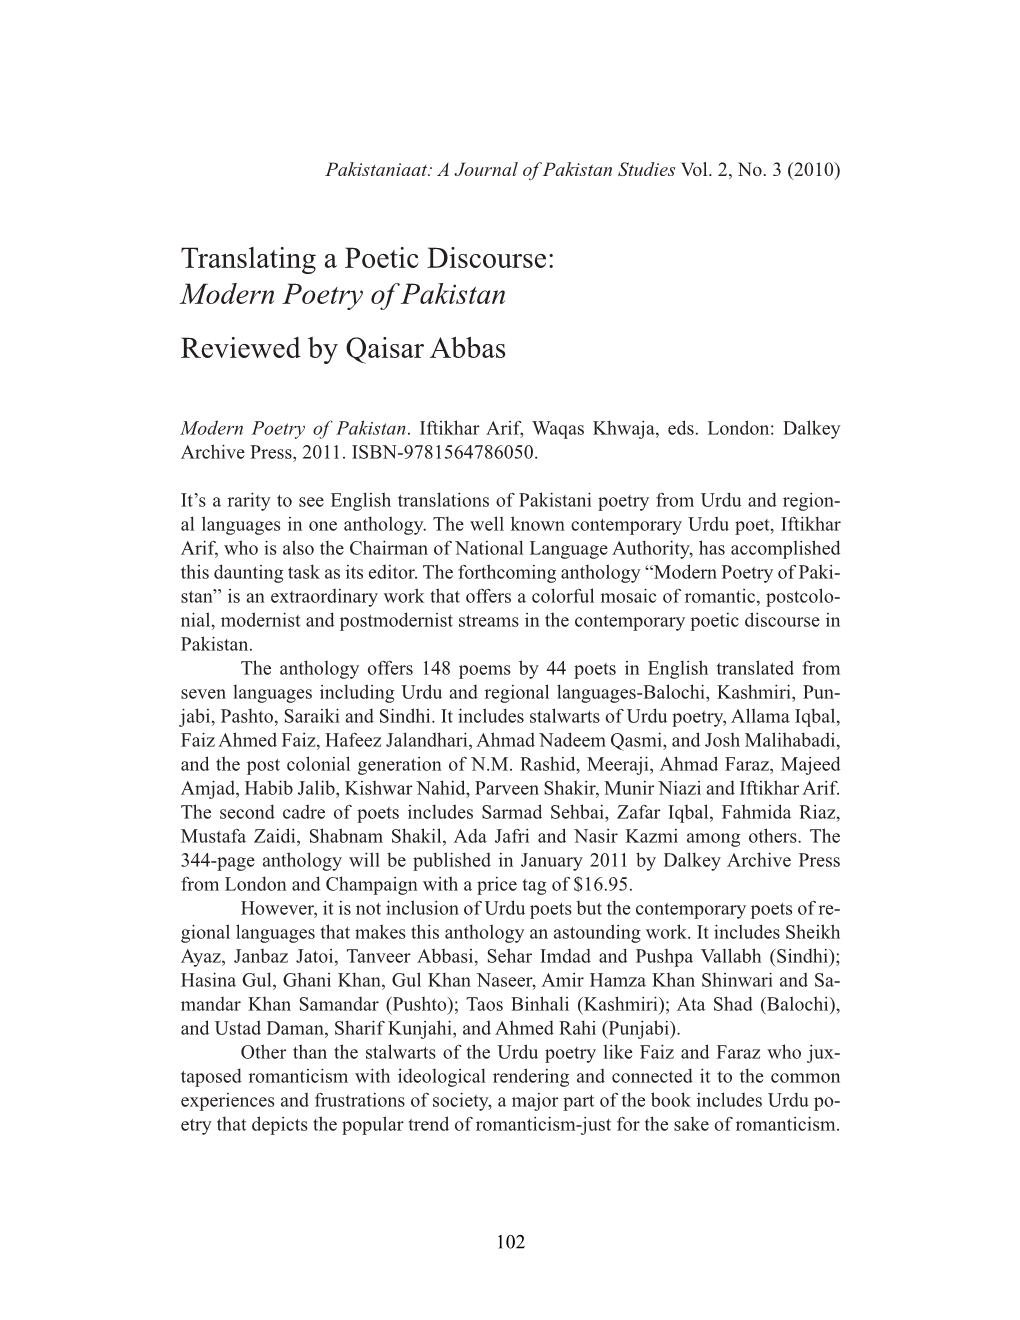 Translating a Poetic Discourse: Modern Poetry of Pakistan Reviewed by Qaisar Abbas